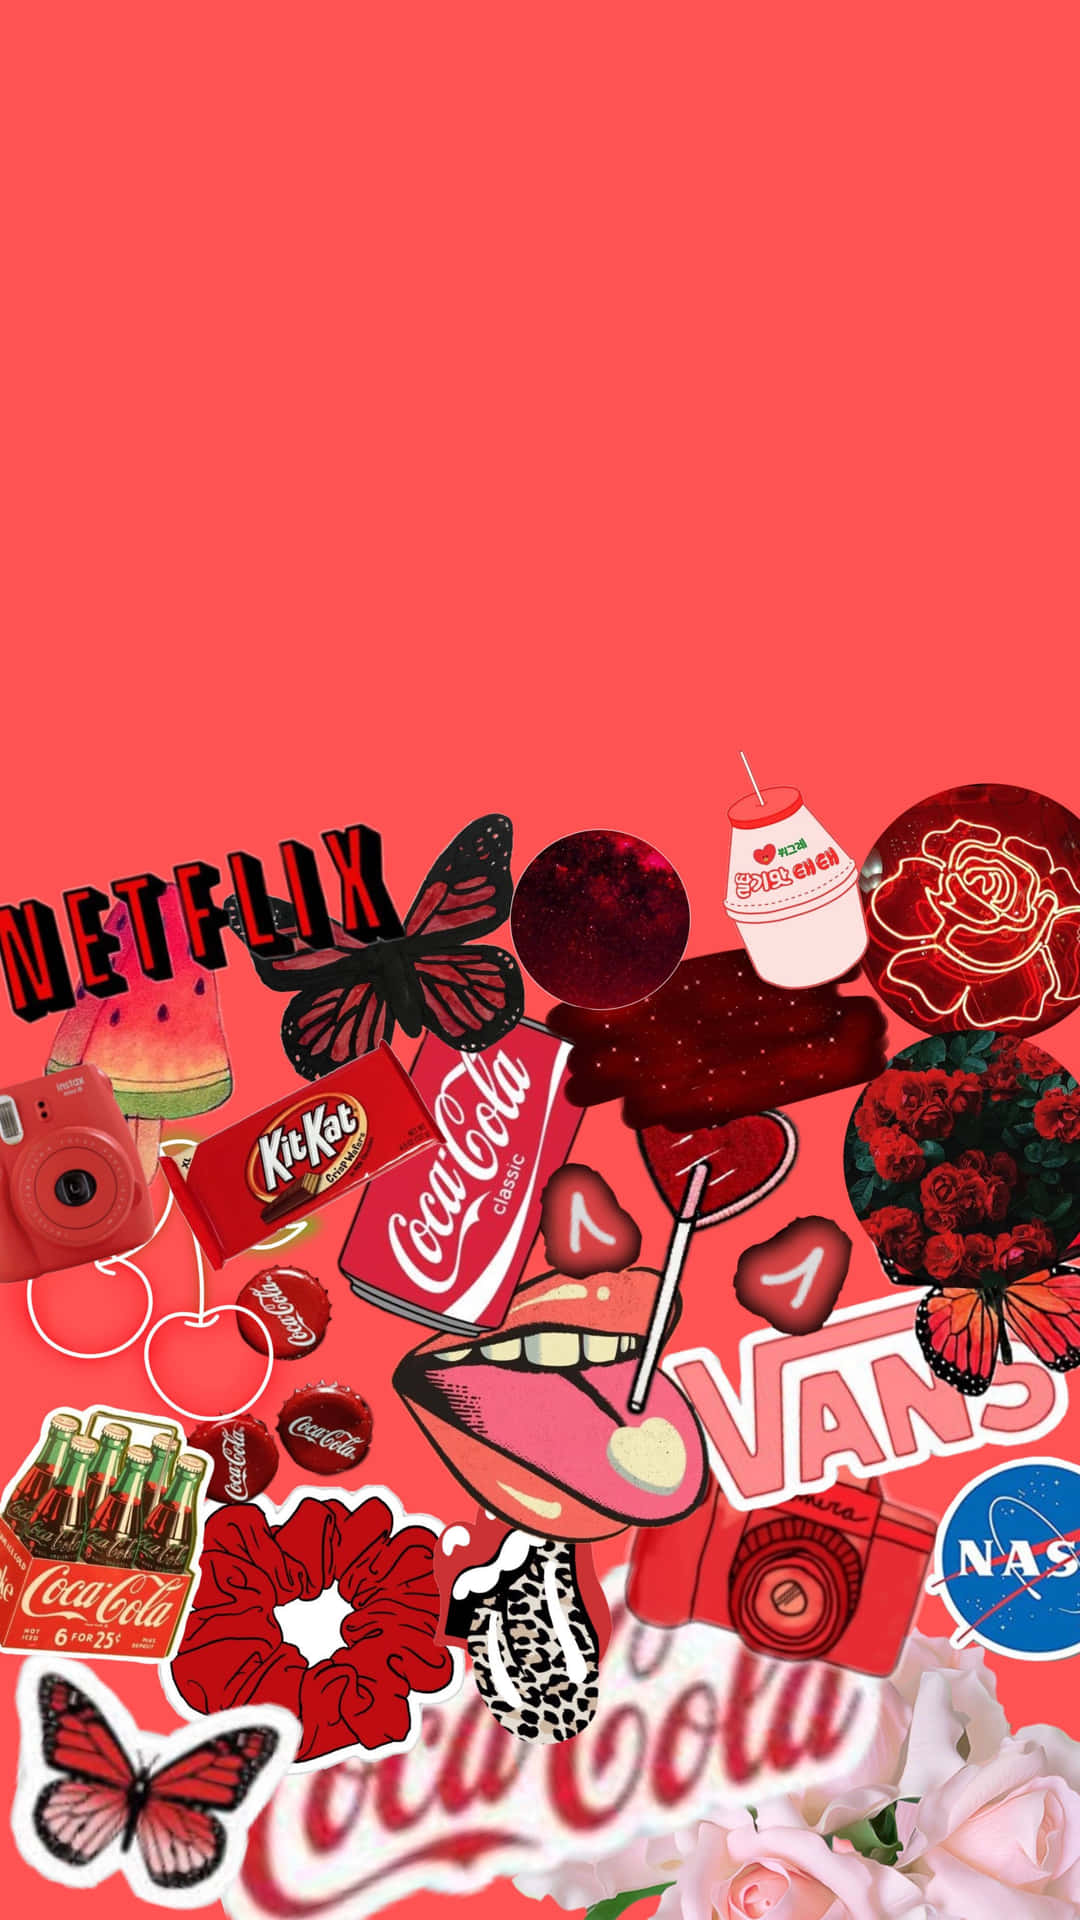 Transparent Images Collage Aesthetic Red Background